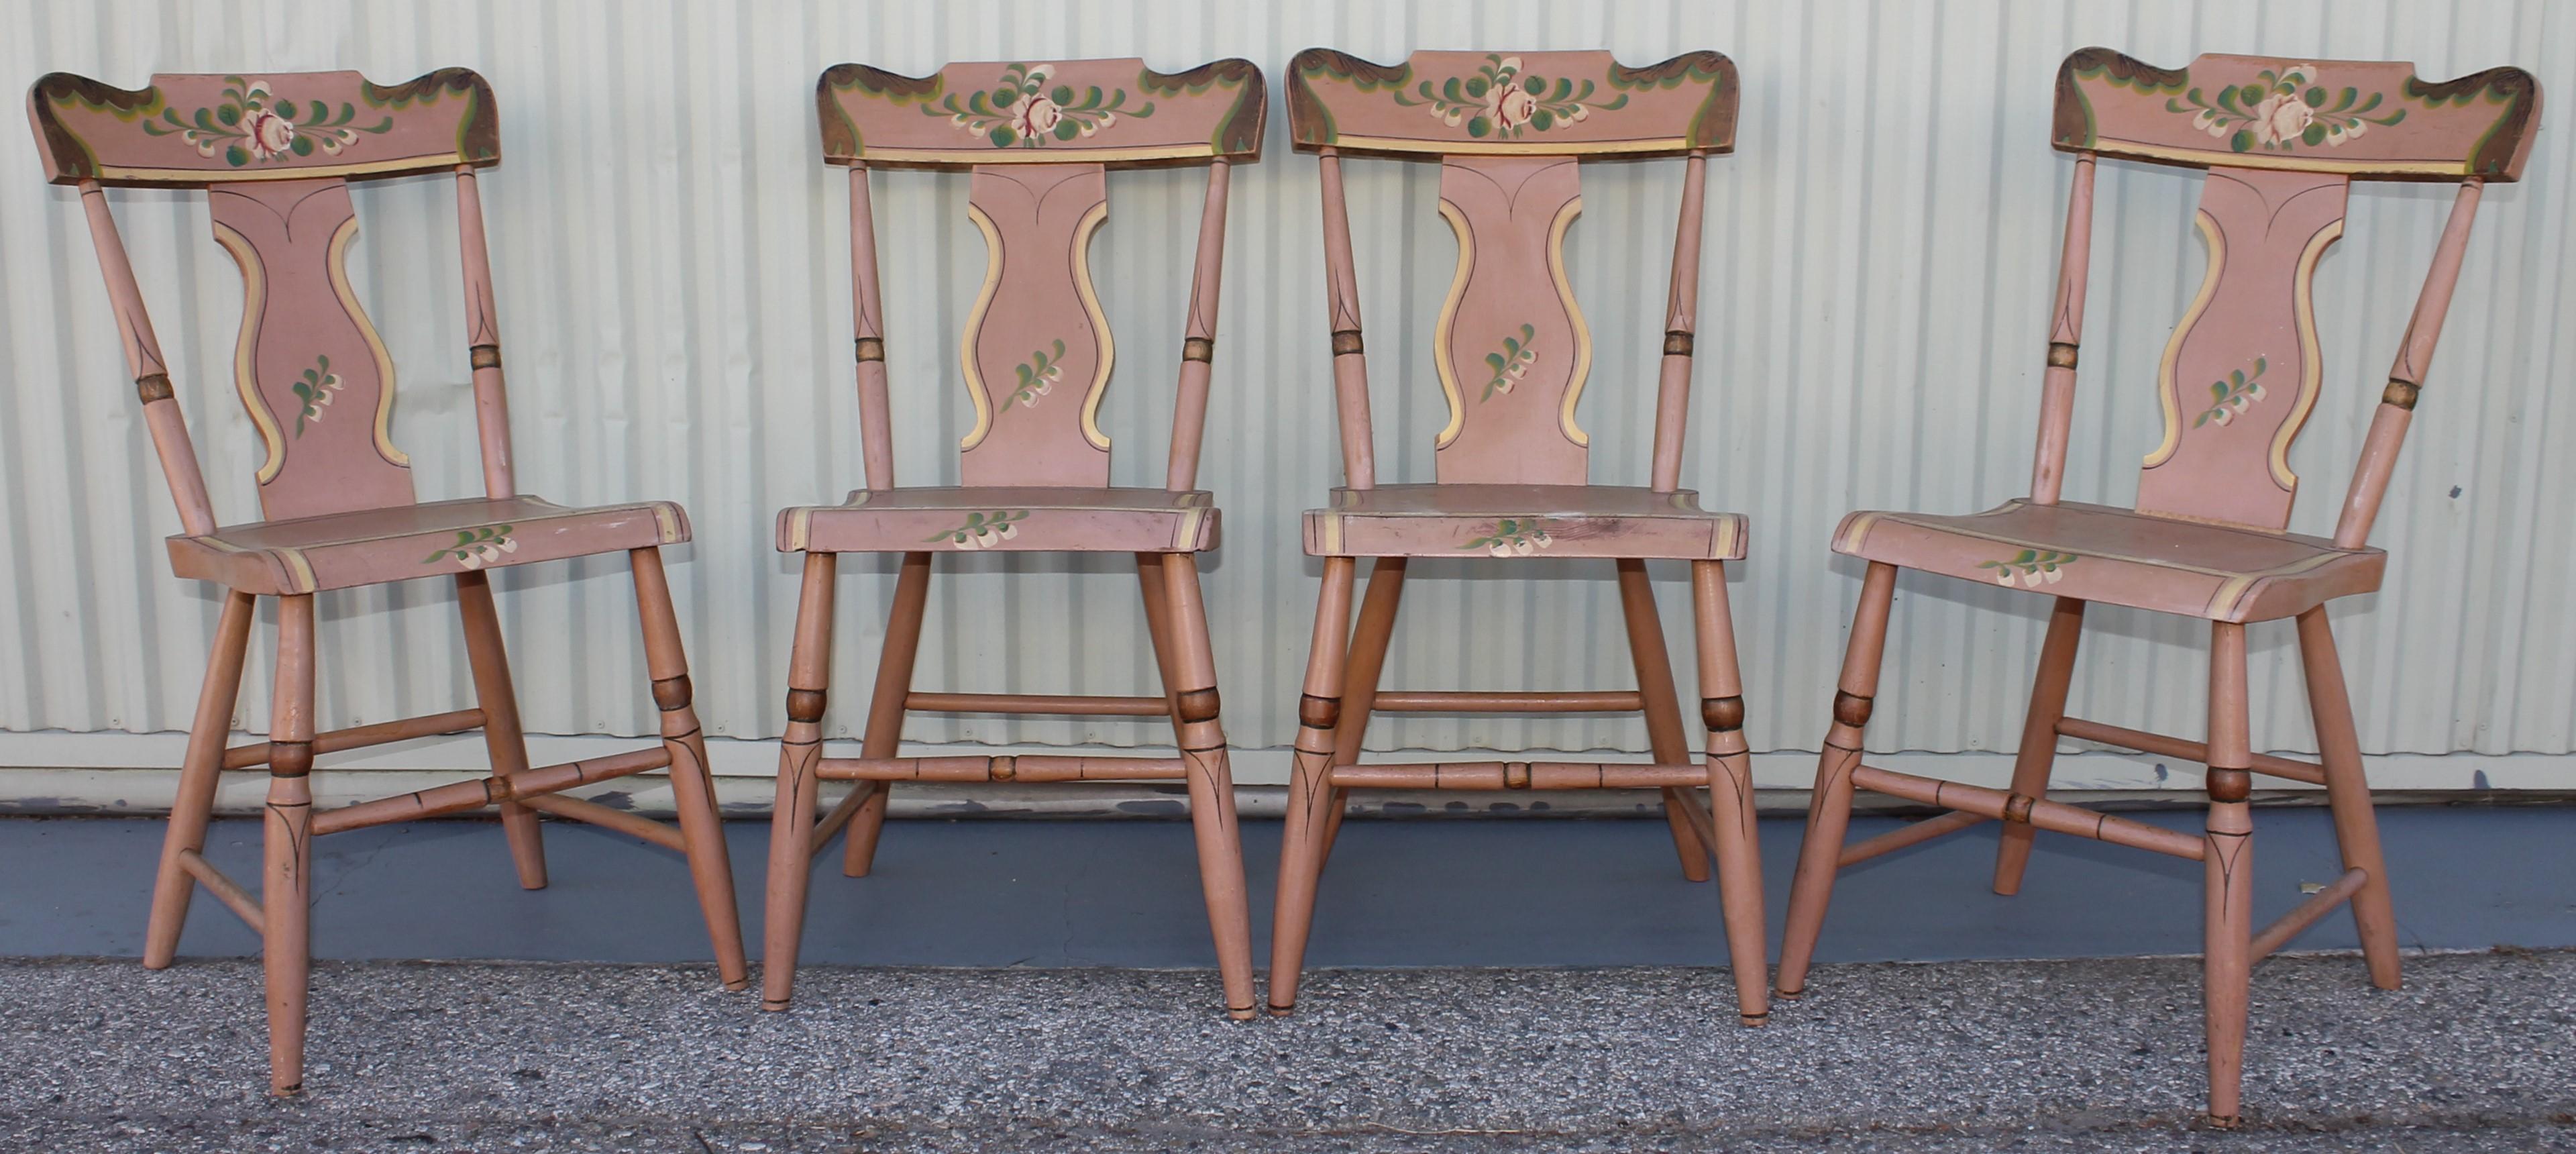 These chairs were found in Lancaster County, Pennsylvania and are in very good and sturdy condition. Beautiful set of four mauve colored hand painted plank bottom chairs with a floral design. Beautiful craftsmanship and elegant and stylish. All